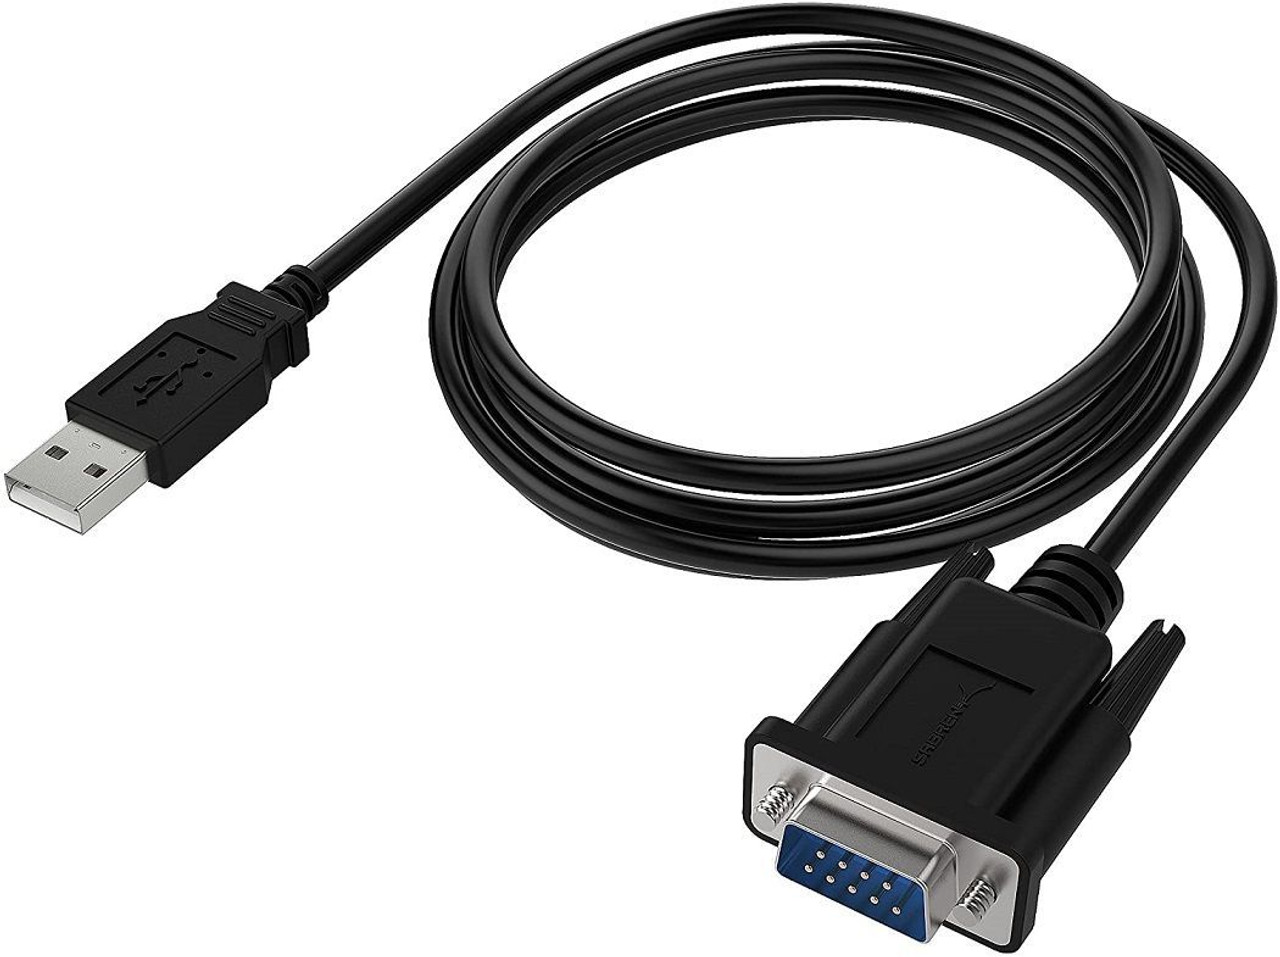 6 Foot USB 2.0 Serial Adapter Cable, FTDI with Thumbscrews